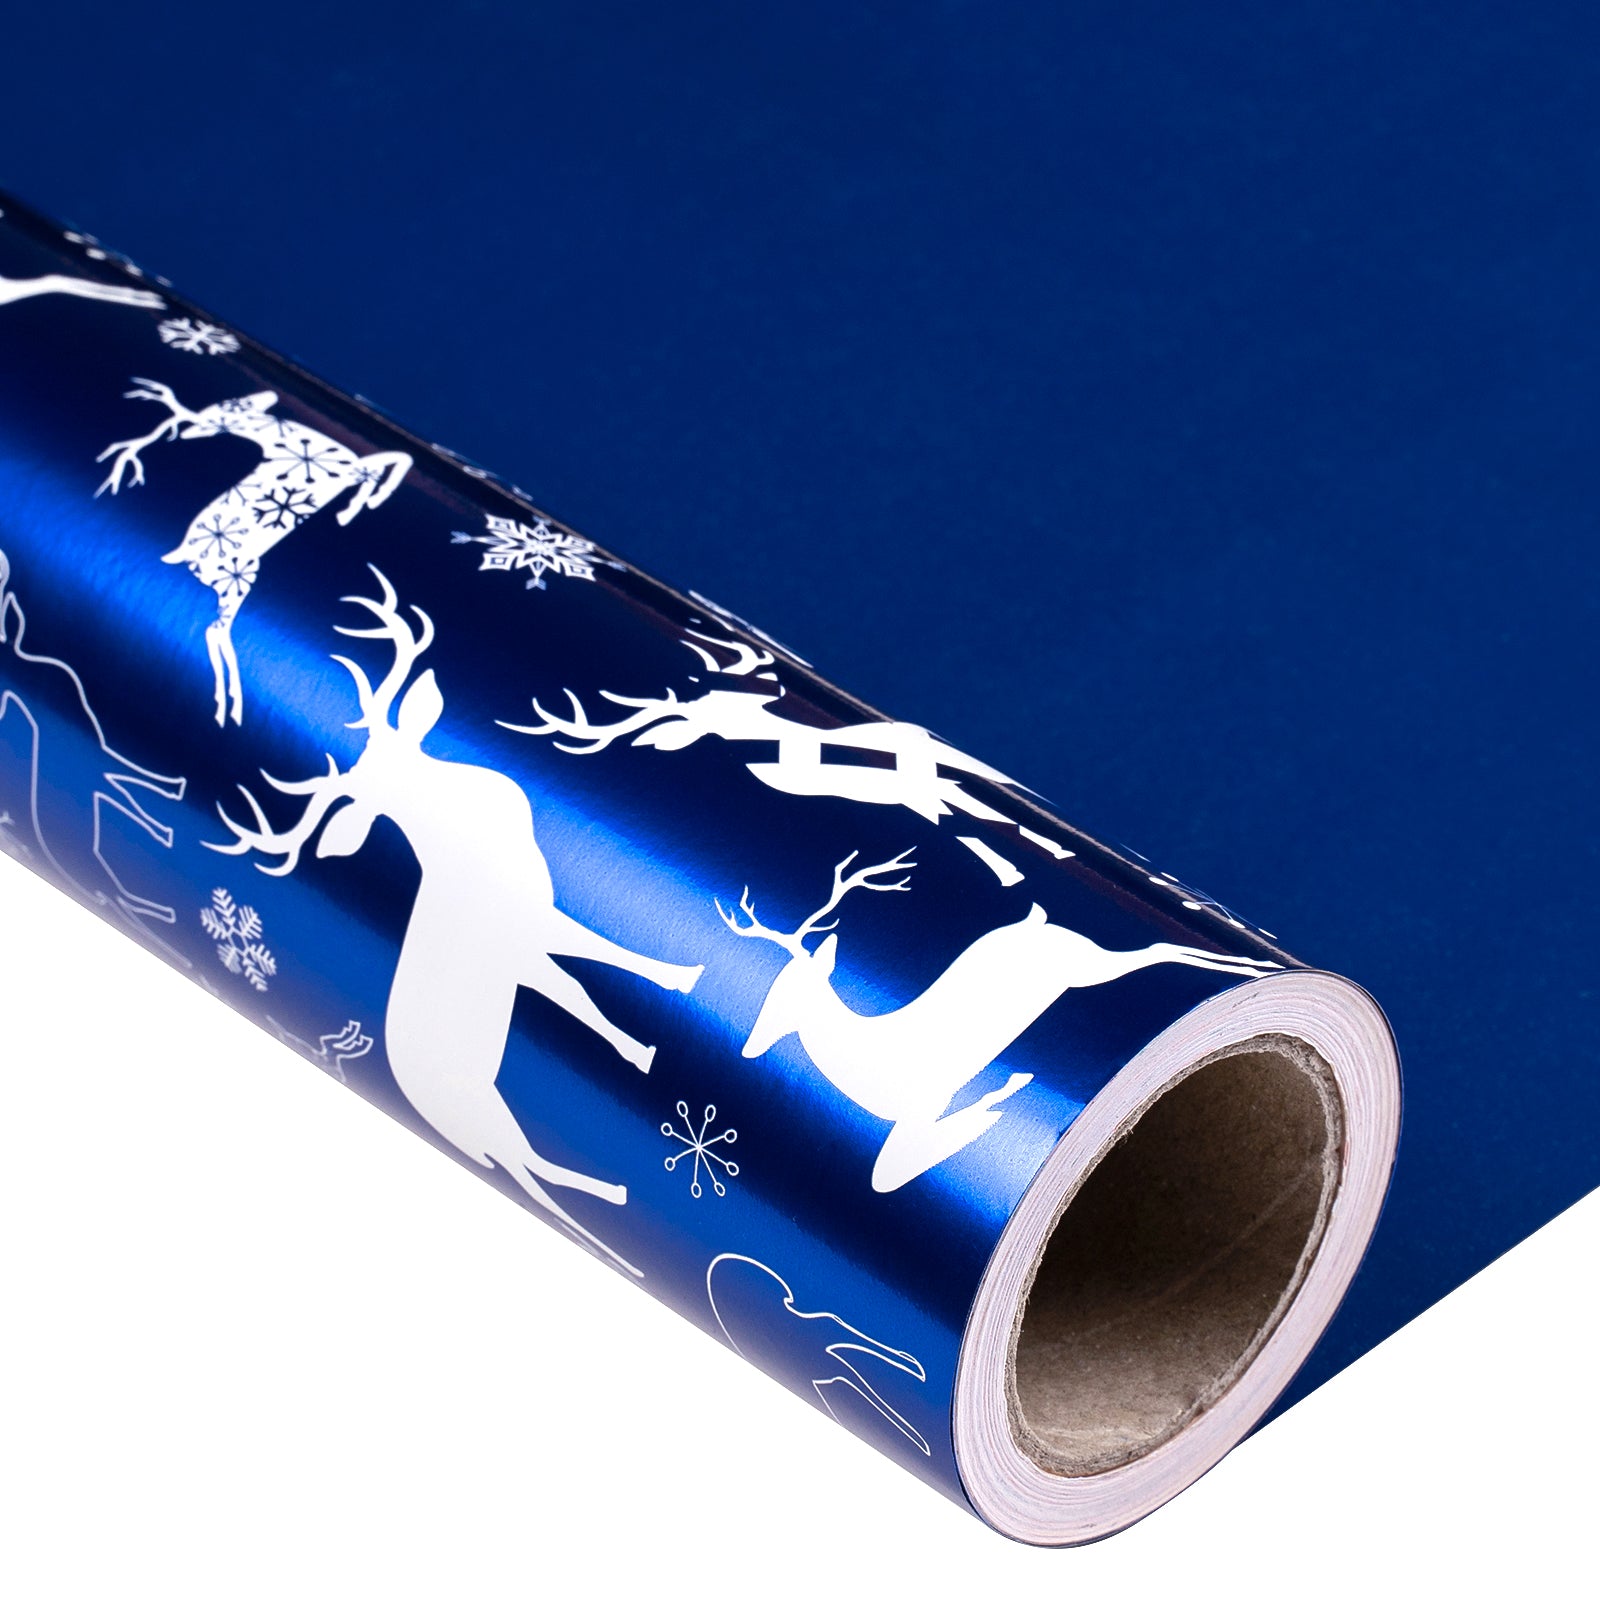 Navy Deer Wrapping Paper Roll with Solid Navy Blue on Reverse. Wholesale Wrapholic